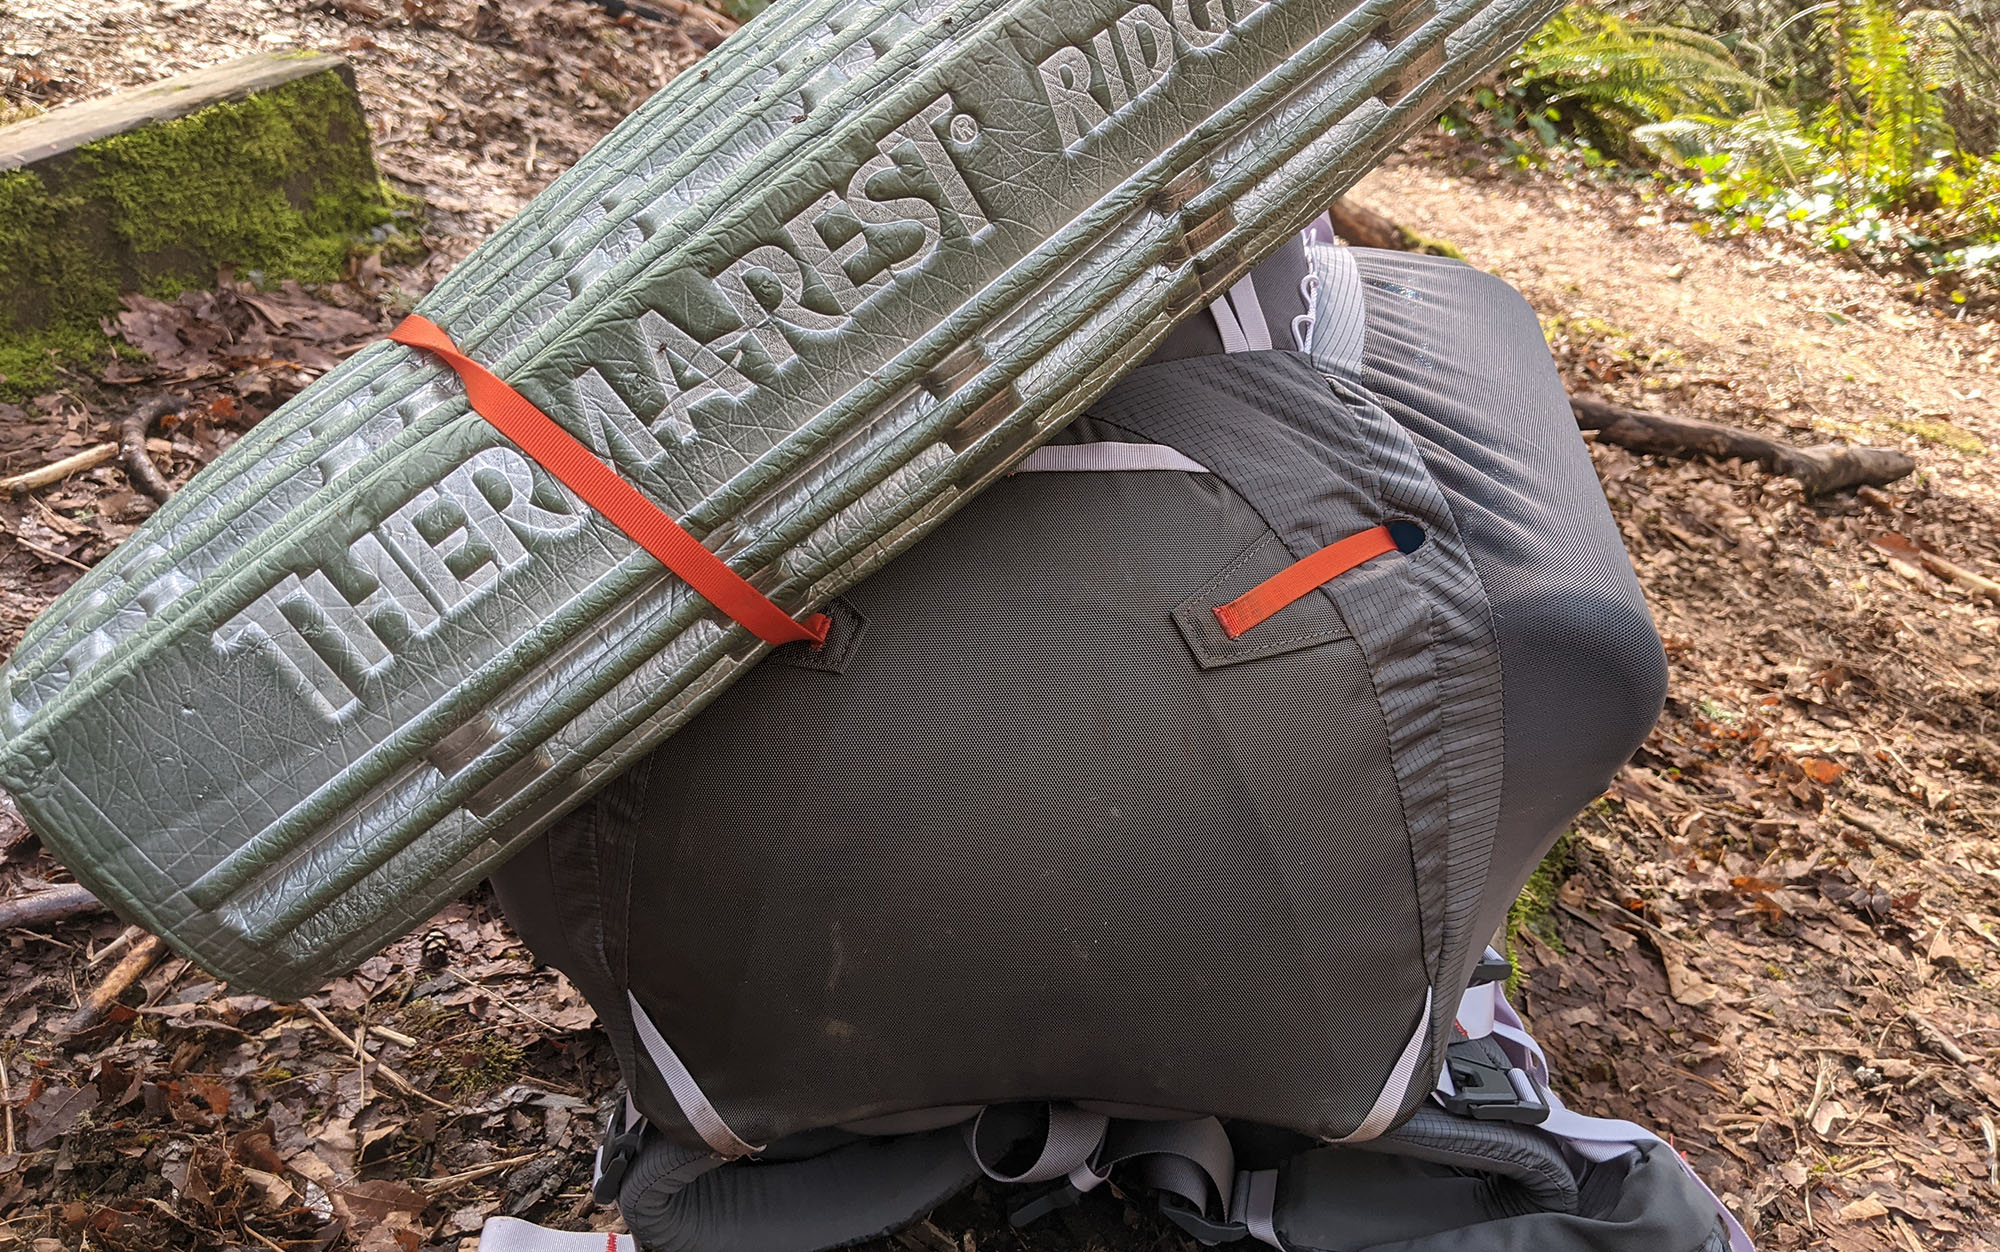 I was able to attach a closed-cell foam pad to the bottom of the Big Agnes Garnet using the compression straps, but it was a little tricker to do than with other packs that use dedicated straps for this purpose.